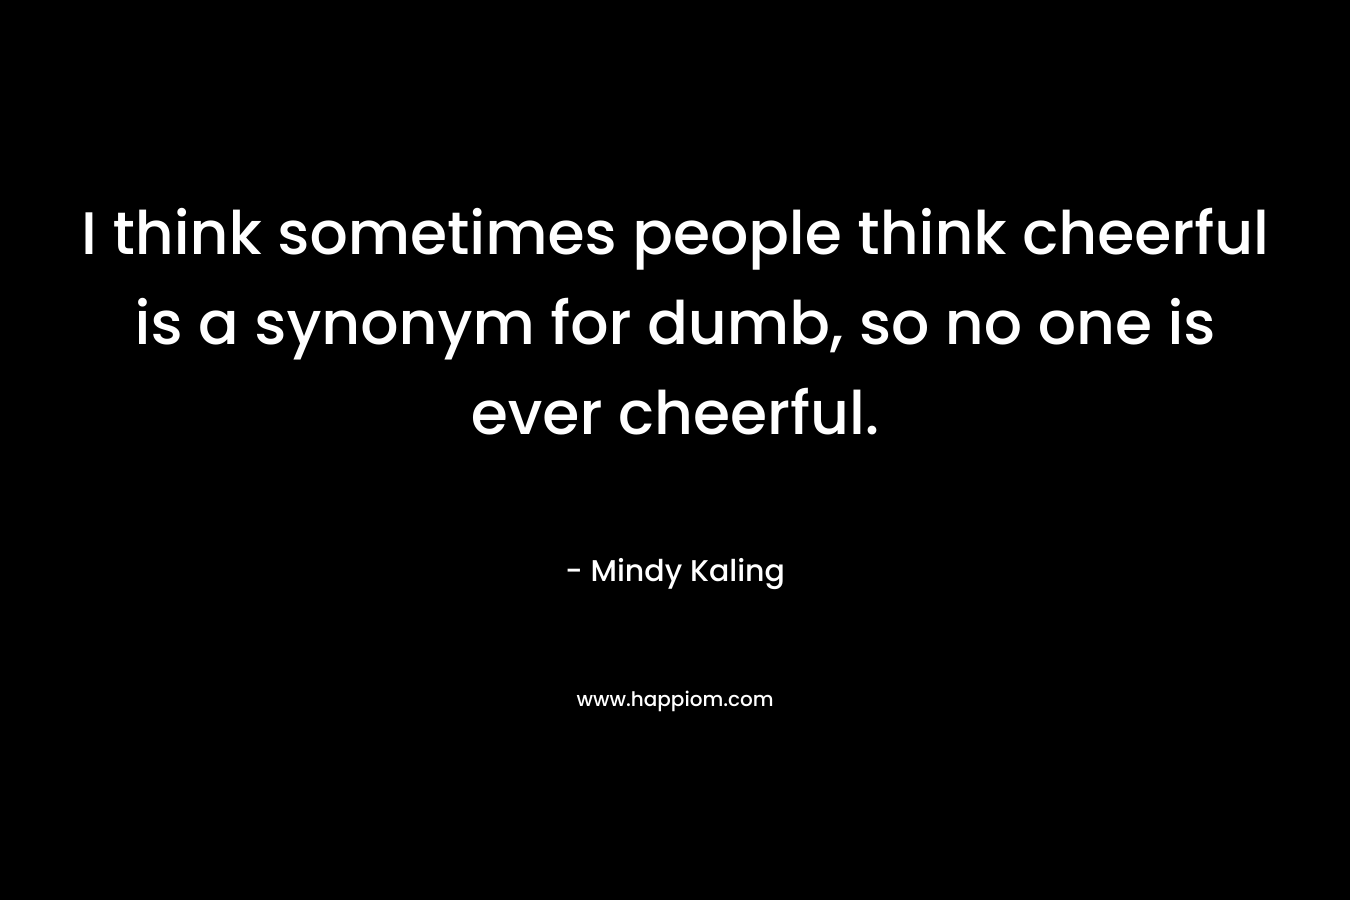 I think sometimes people think cheerful is a synonym for dumb, so no one is ever cheerful. – Mindy Kaling